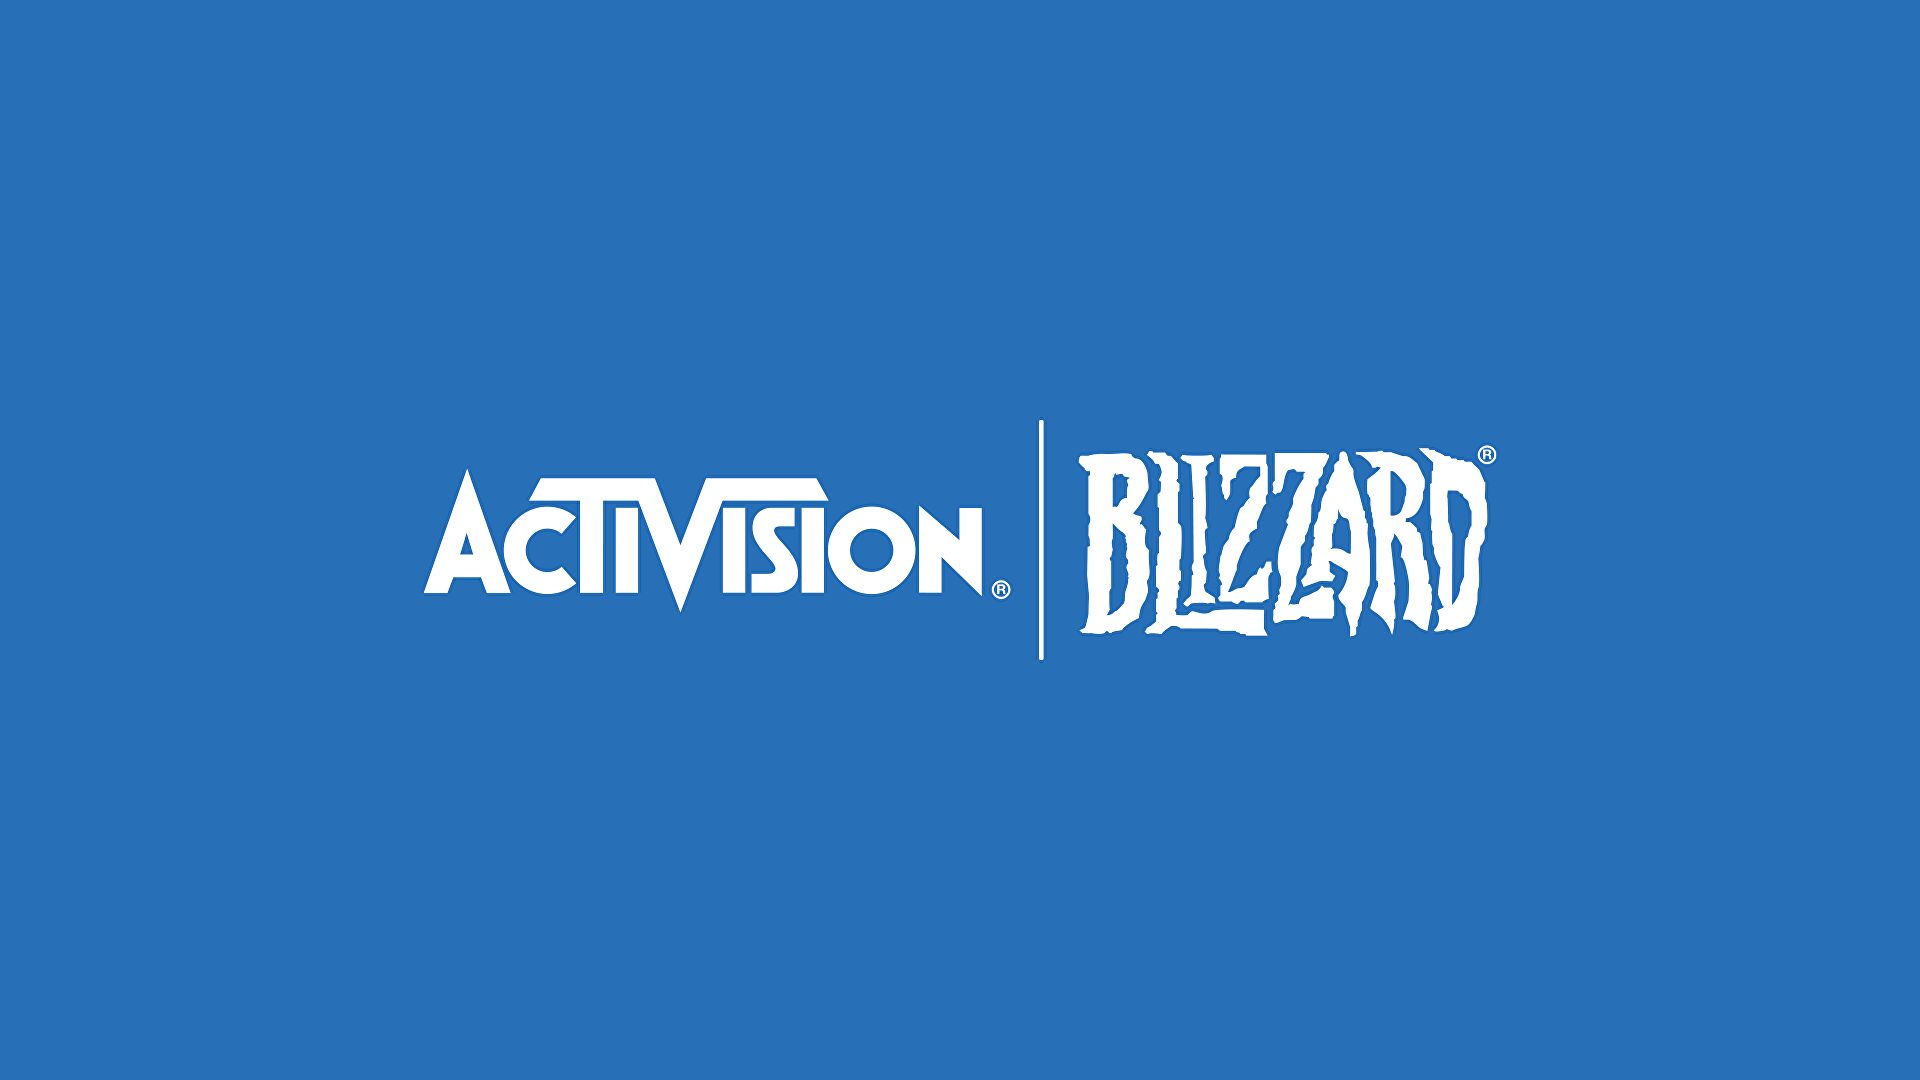 Image for Activision Blizzard board says there's “no evidence” they tolerated any "reported" harassment